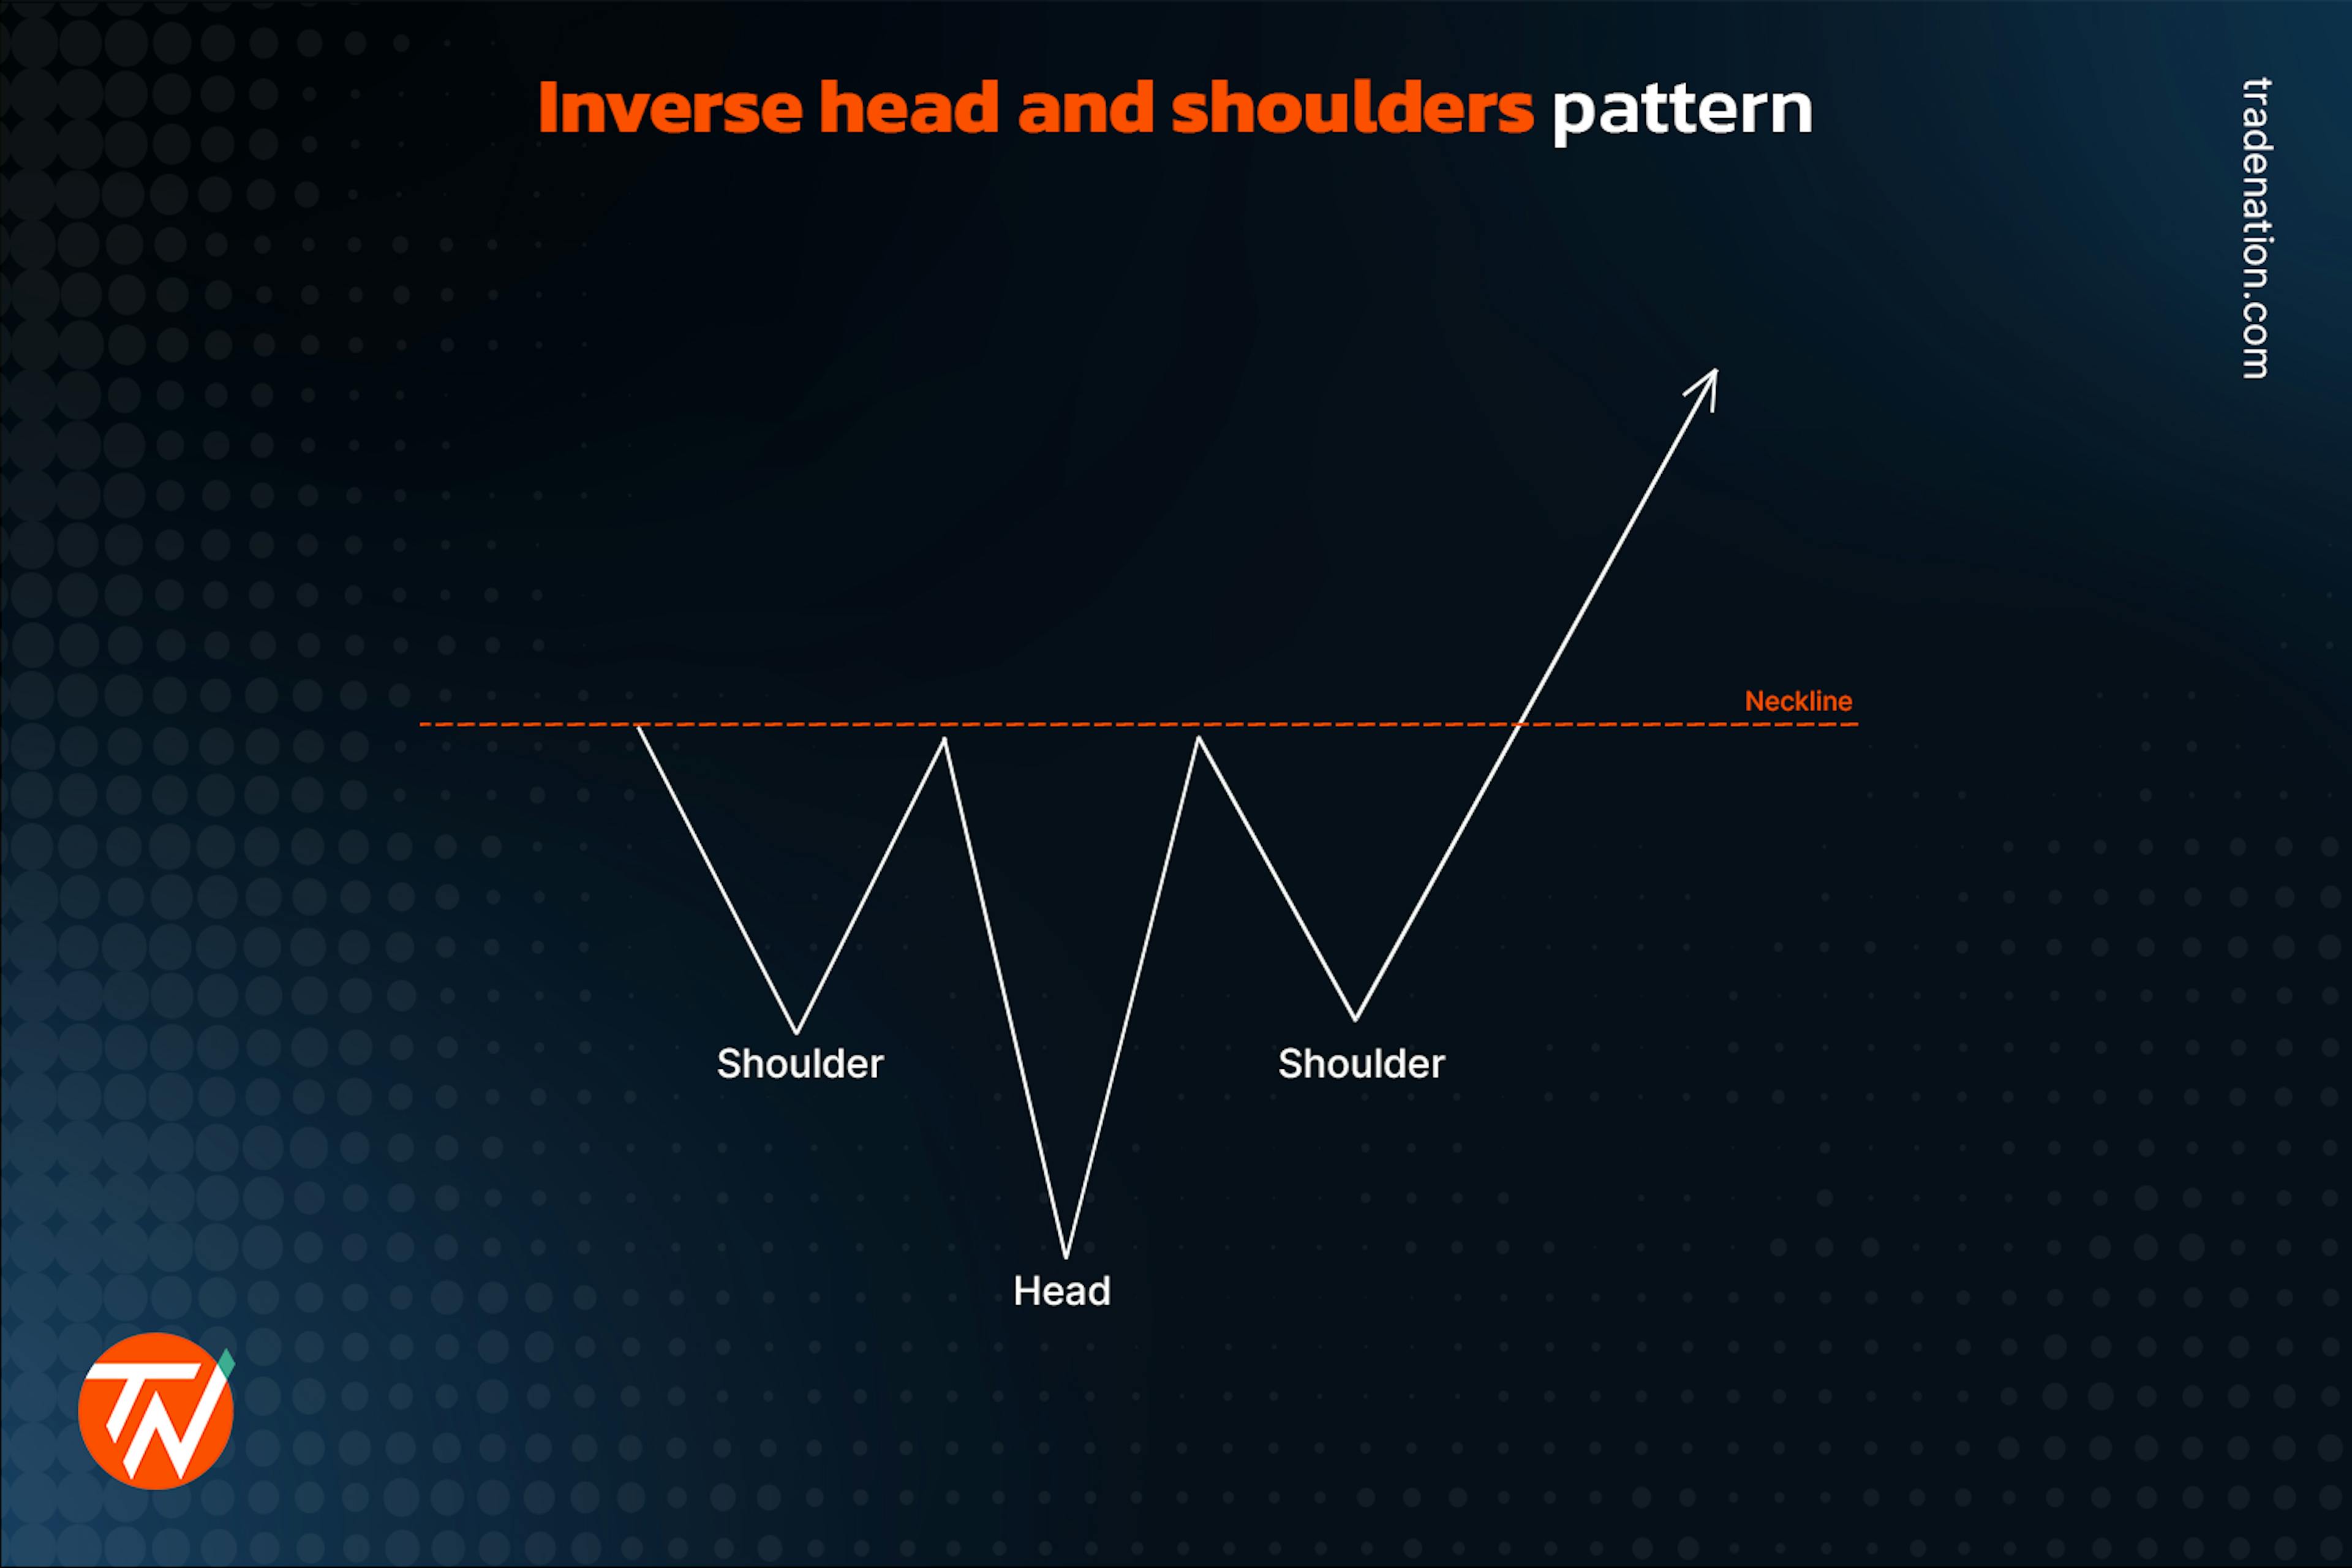 The inverse head and shoulders pattern